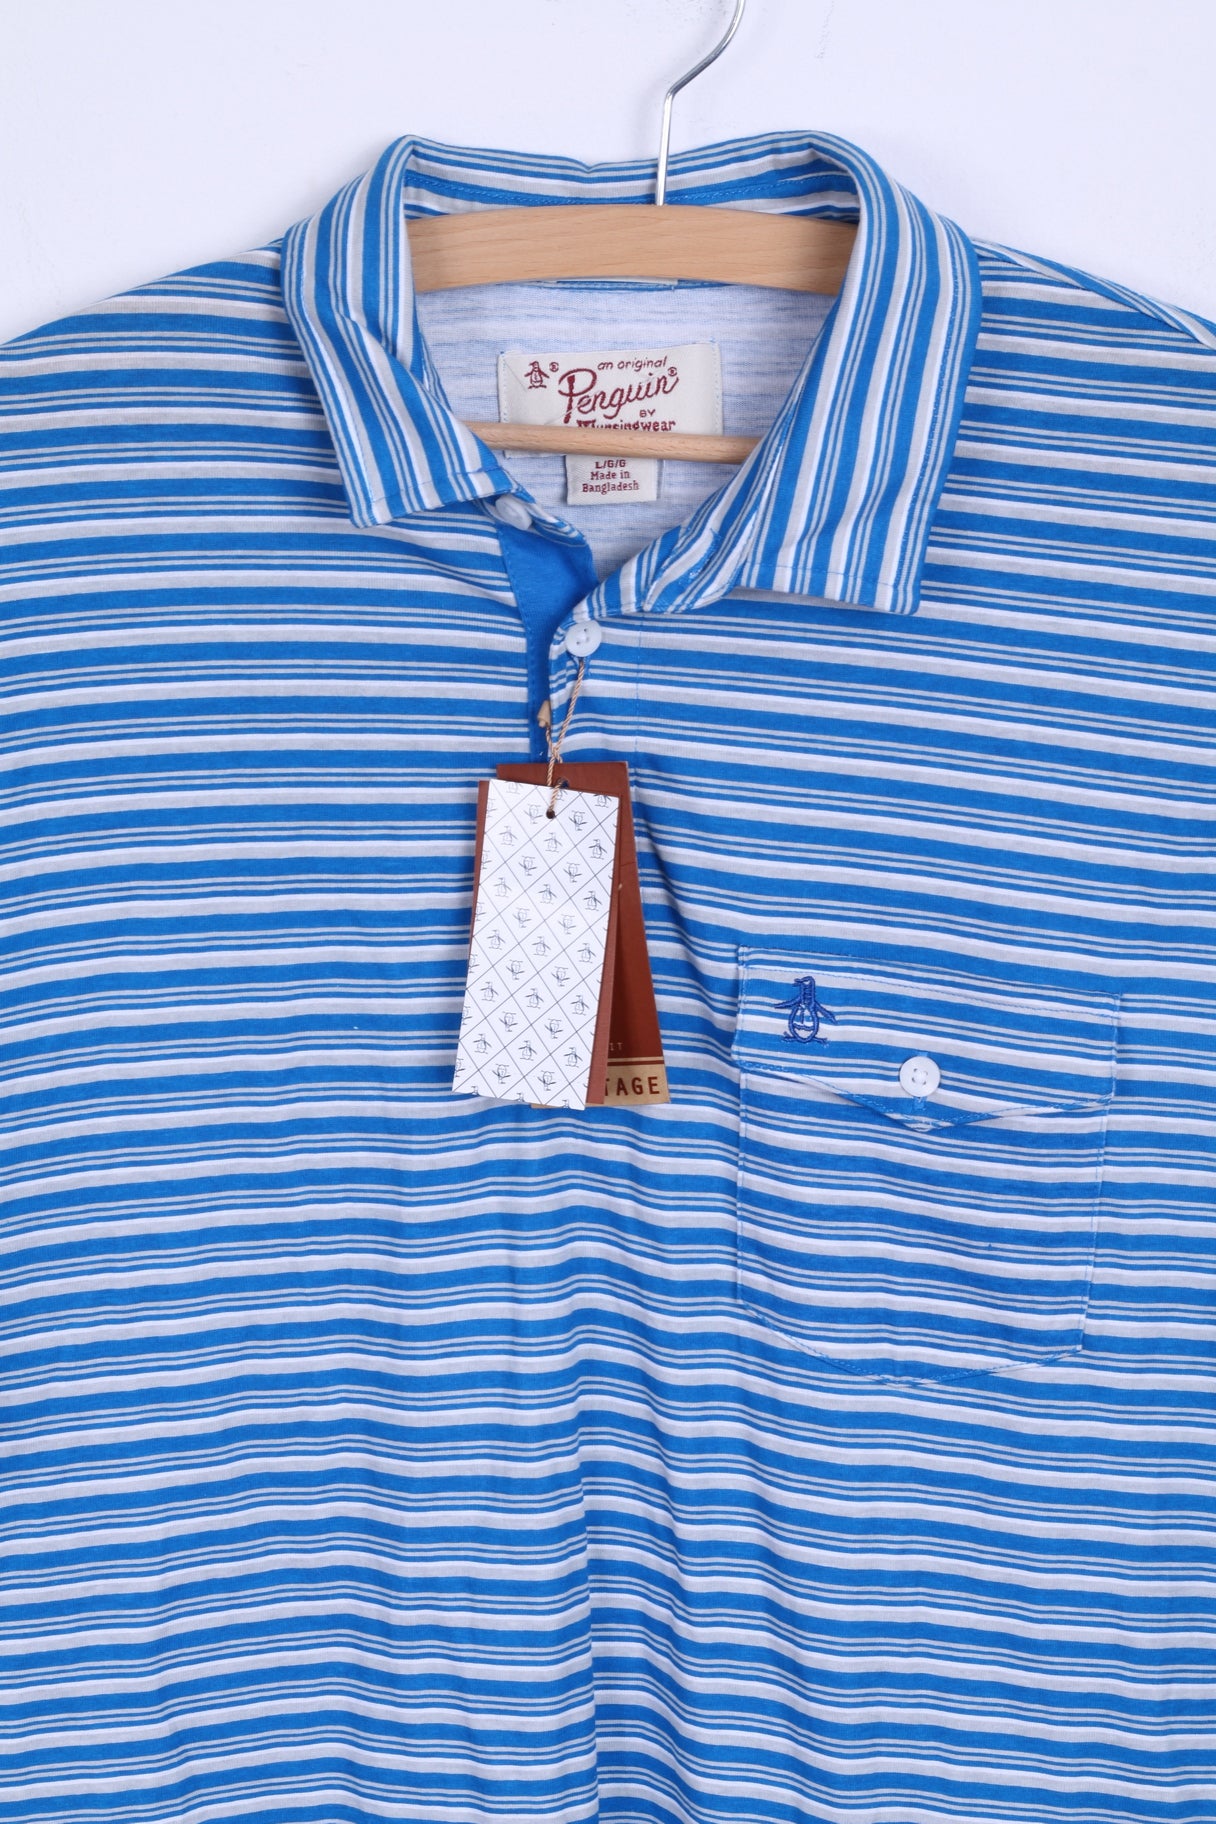 New Penguin Mens L Polo Shirt Cotton Blue Striped Heritage Slim Fit Stretch